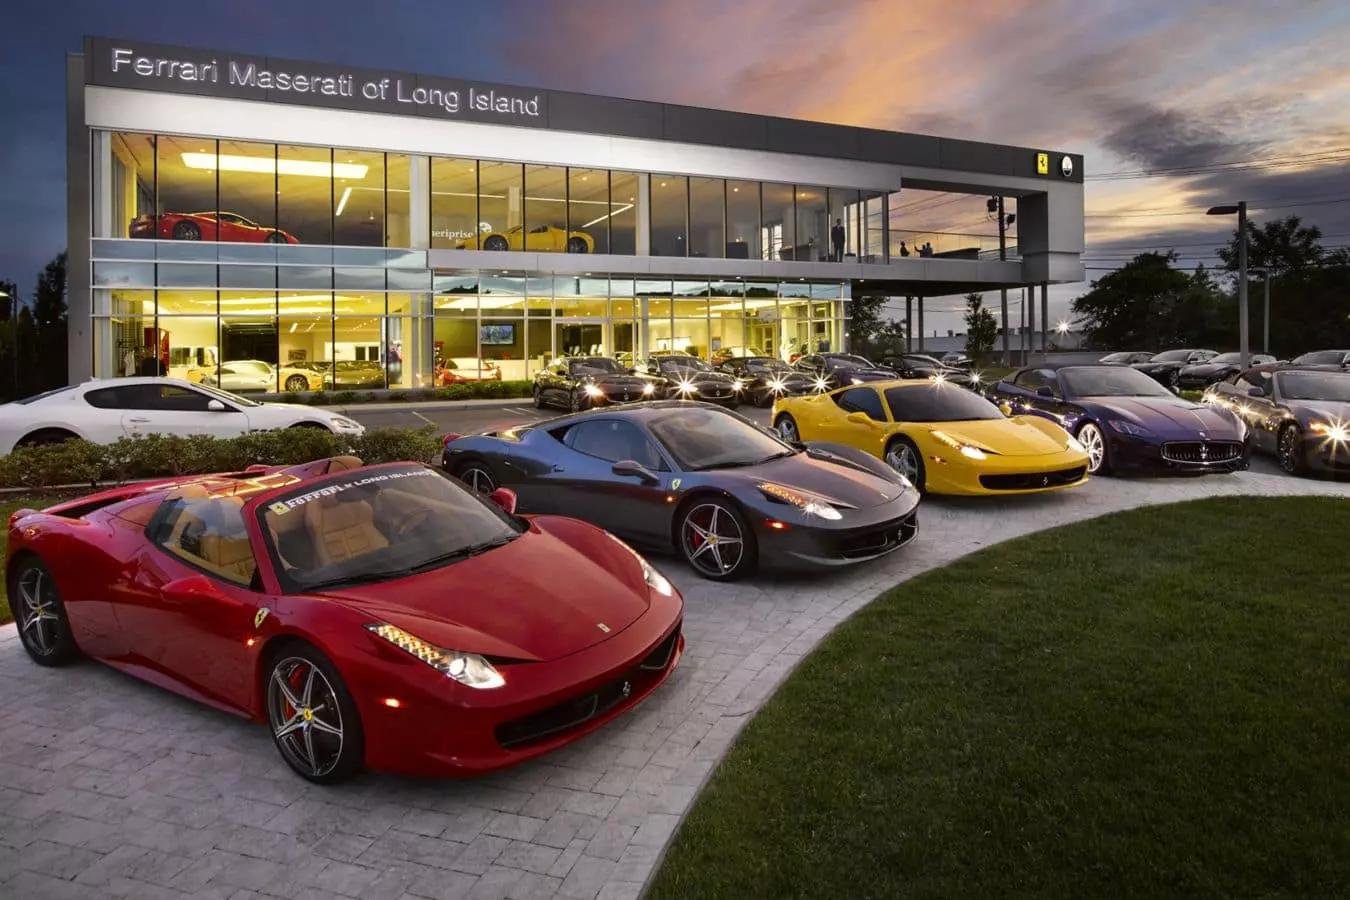 ferrari dealership new york - Do you have to be invited to buy a Ferrari